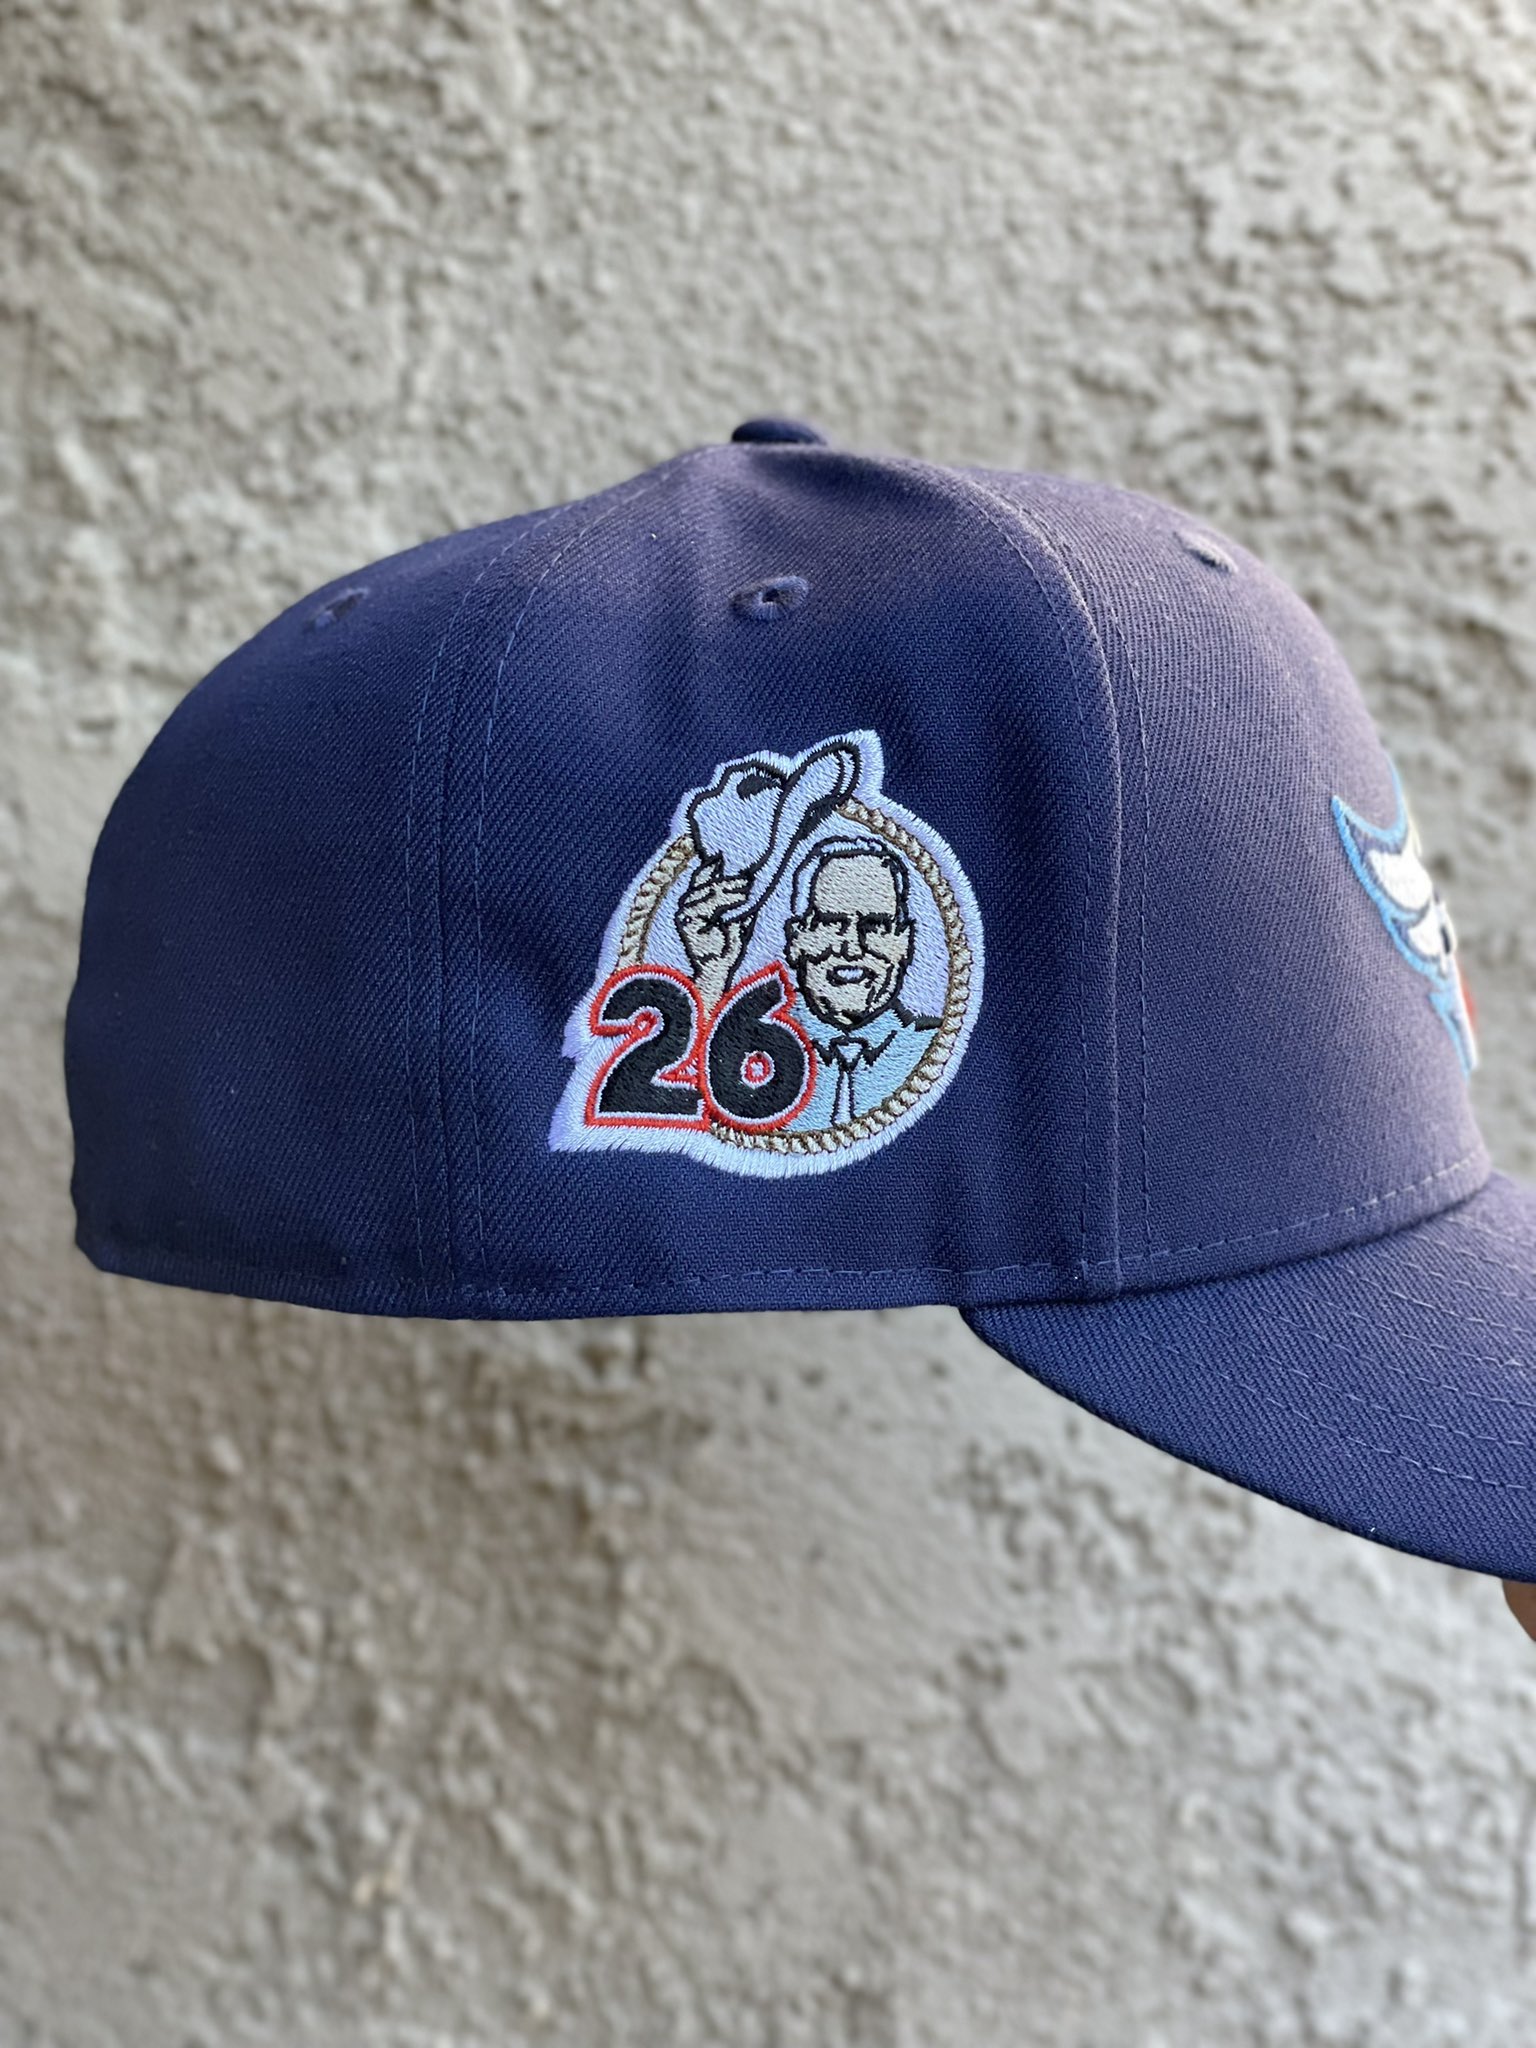 🌵 on X: In 1999 the Angels wore a patch on their jersey to honor the  passing of their first owner of the team Gene Autry. So I turned it into a